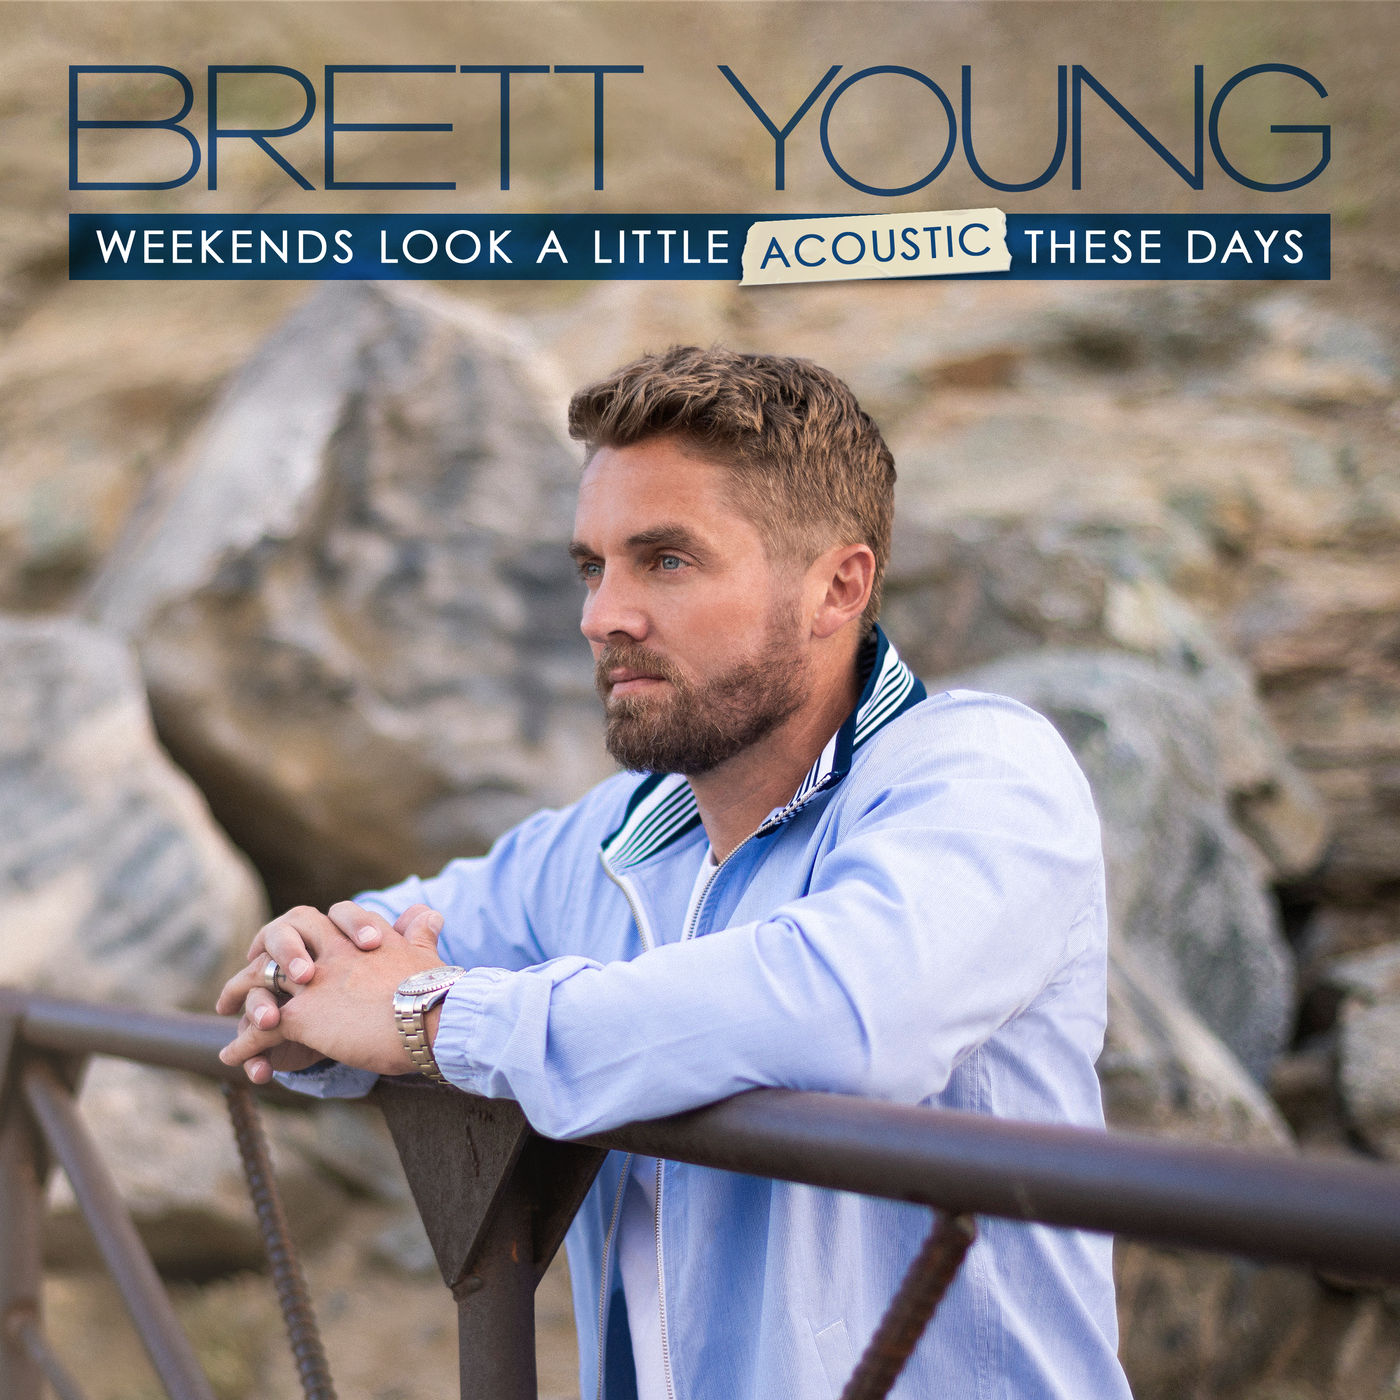 Brett Young - Weekends Look A Little Acoustic These Days (2021) [FLAC 24bit/96kHz]